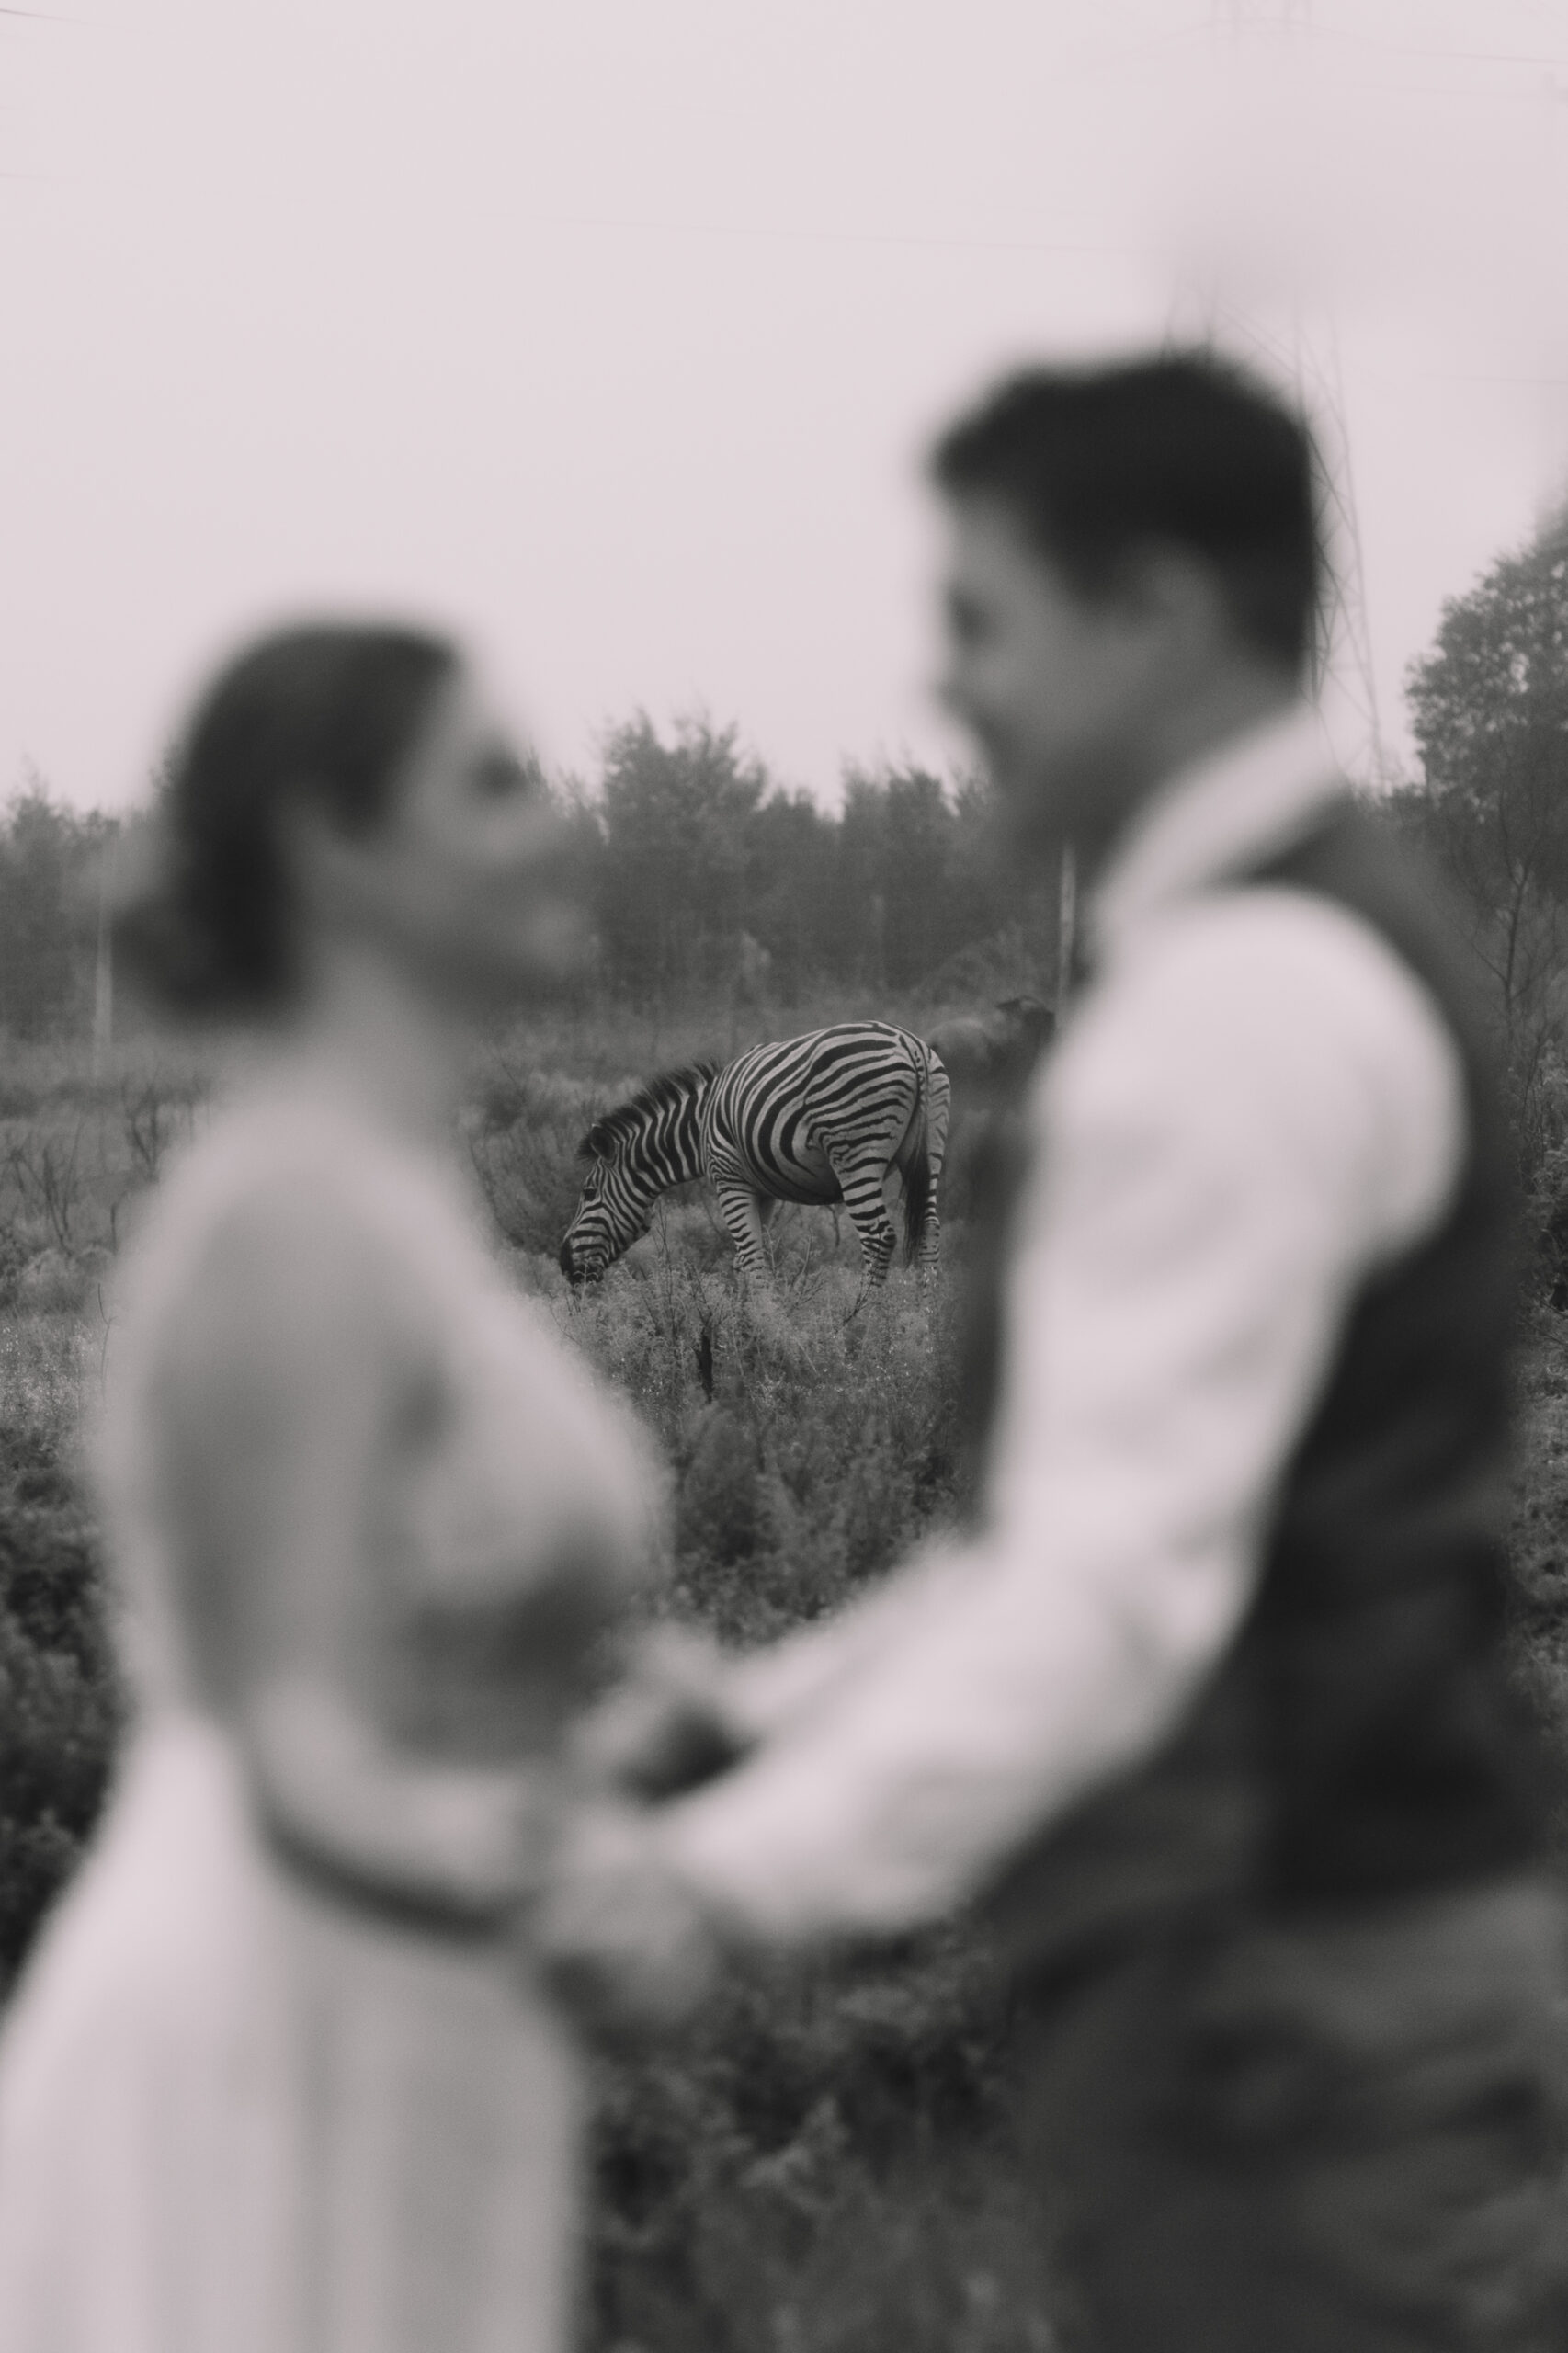 Bride and Groom out of focus holding hands with a zebra in focus in the background